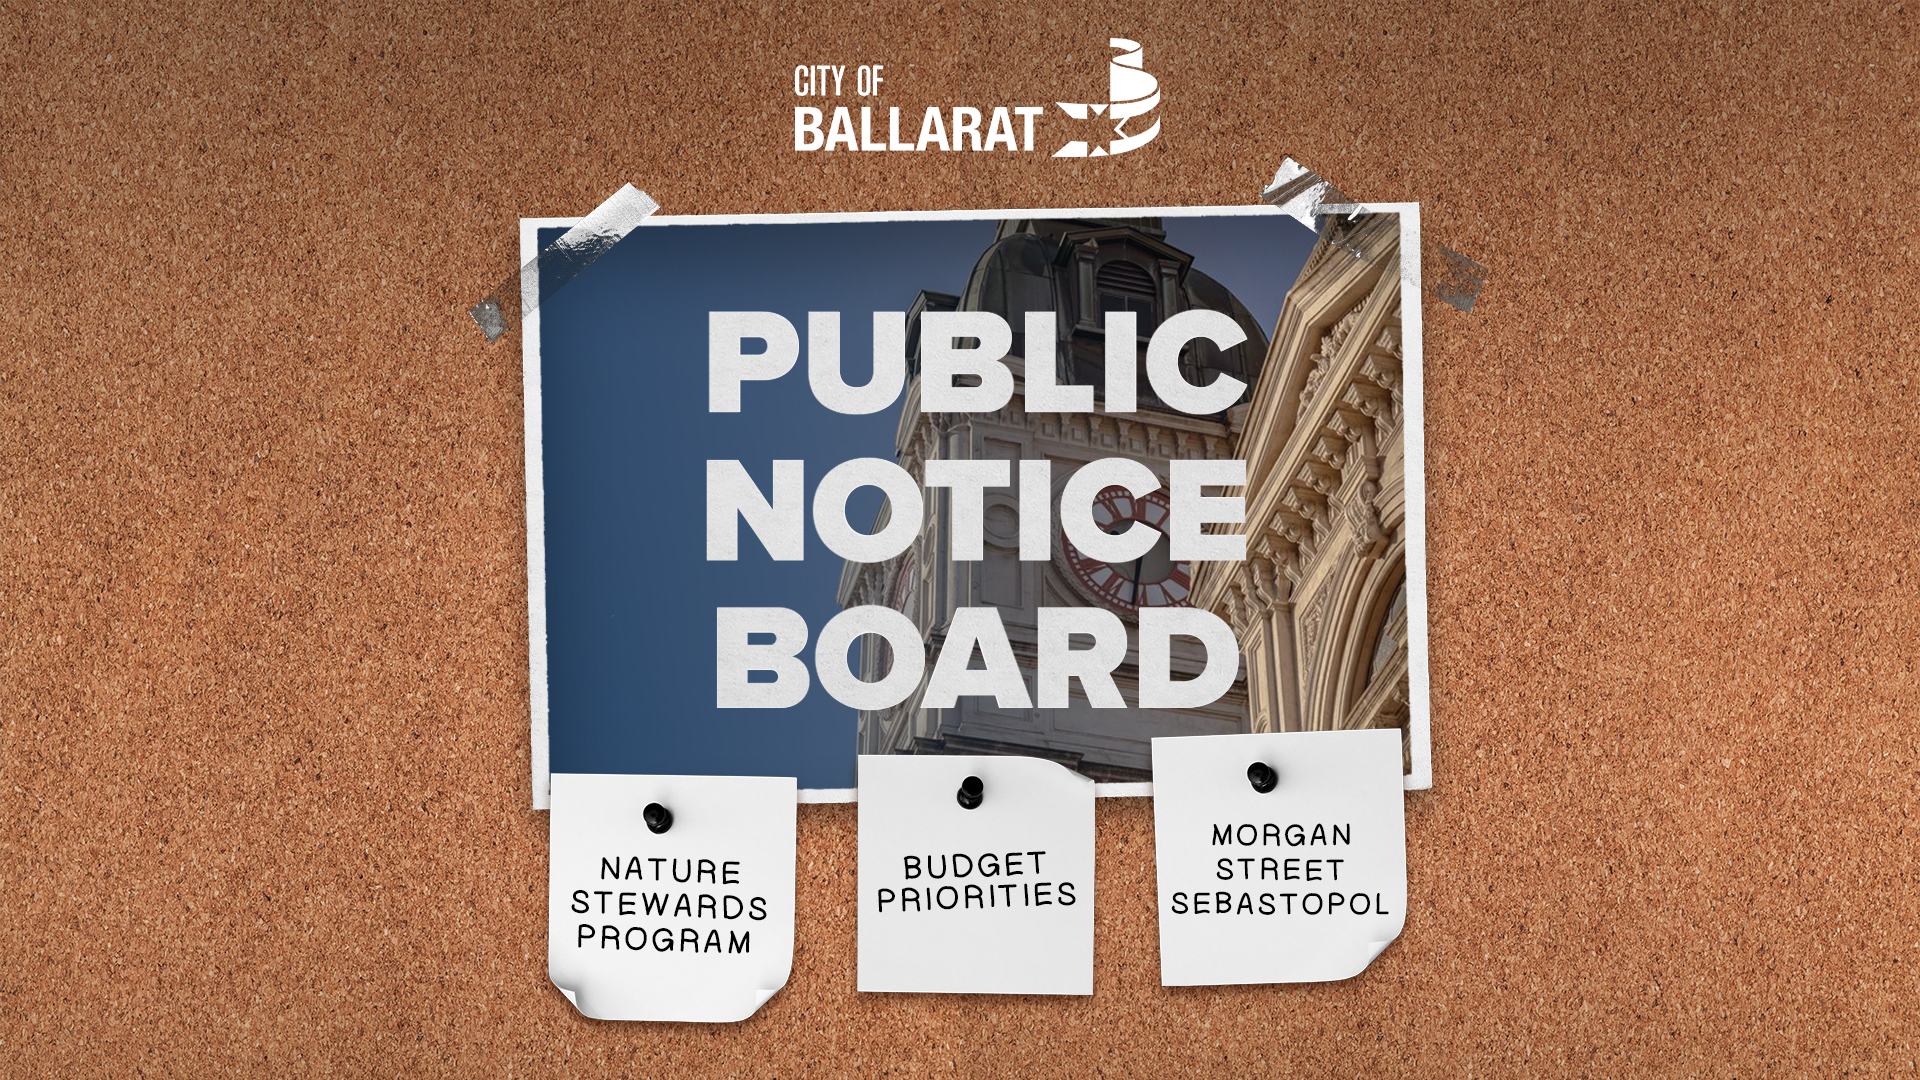 Notice board with Public Notice Board text over an image of Ballarat Town Hall. Three notes underneath with text saying Nature Strewards Program, Budget Priorities, Morgan Street Sebastopol